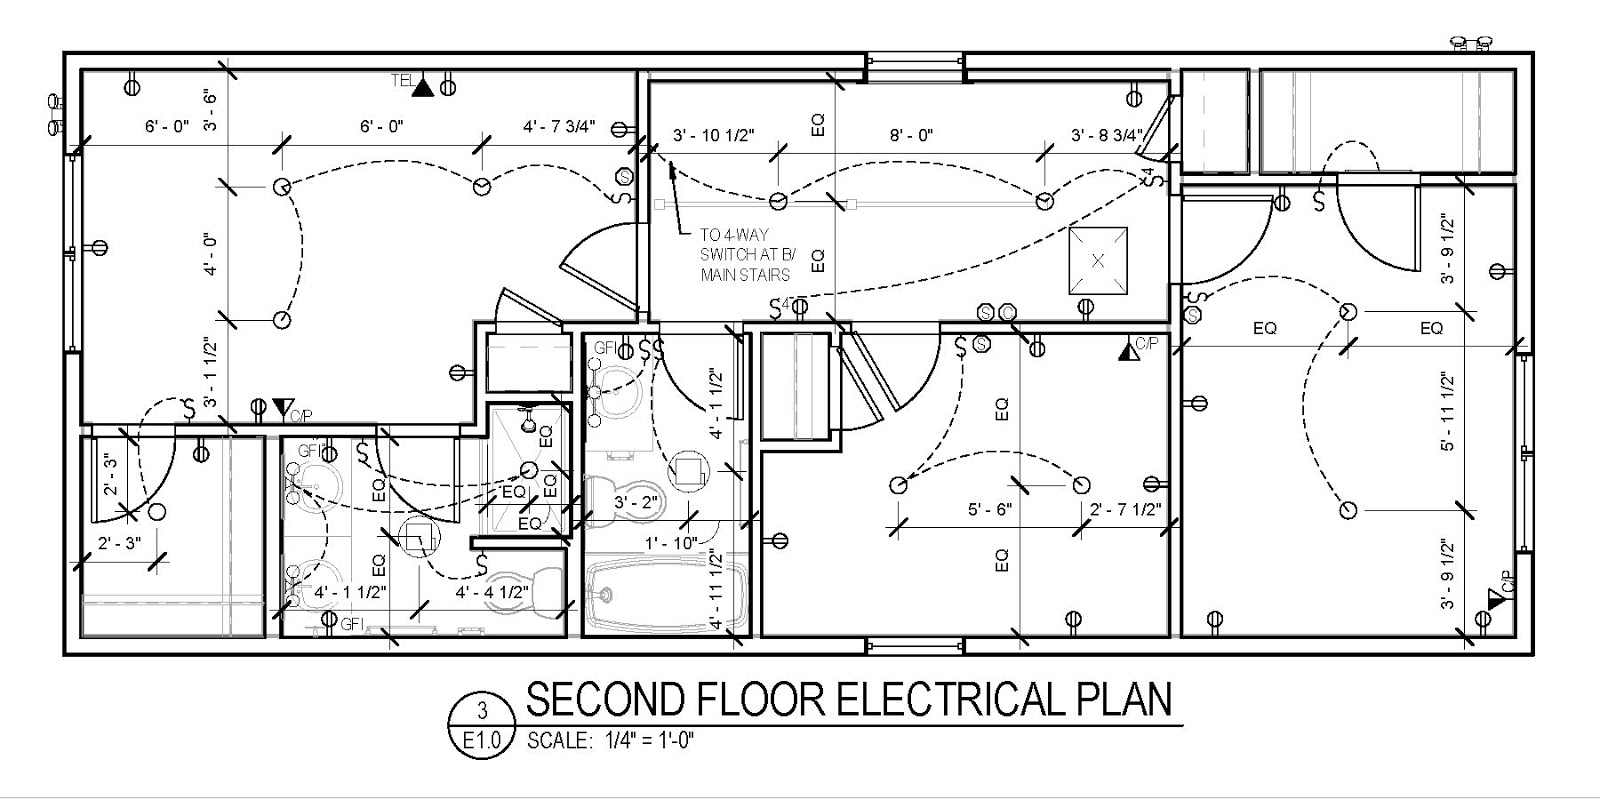 Home keys and small house under construction on electrical drawings,  building home concept Stock Photo by ratmaner